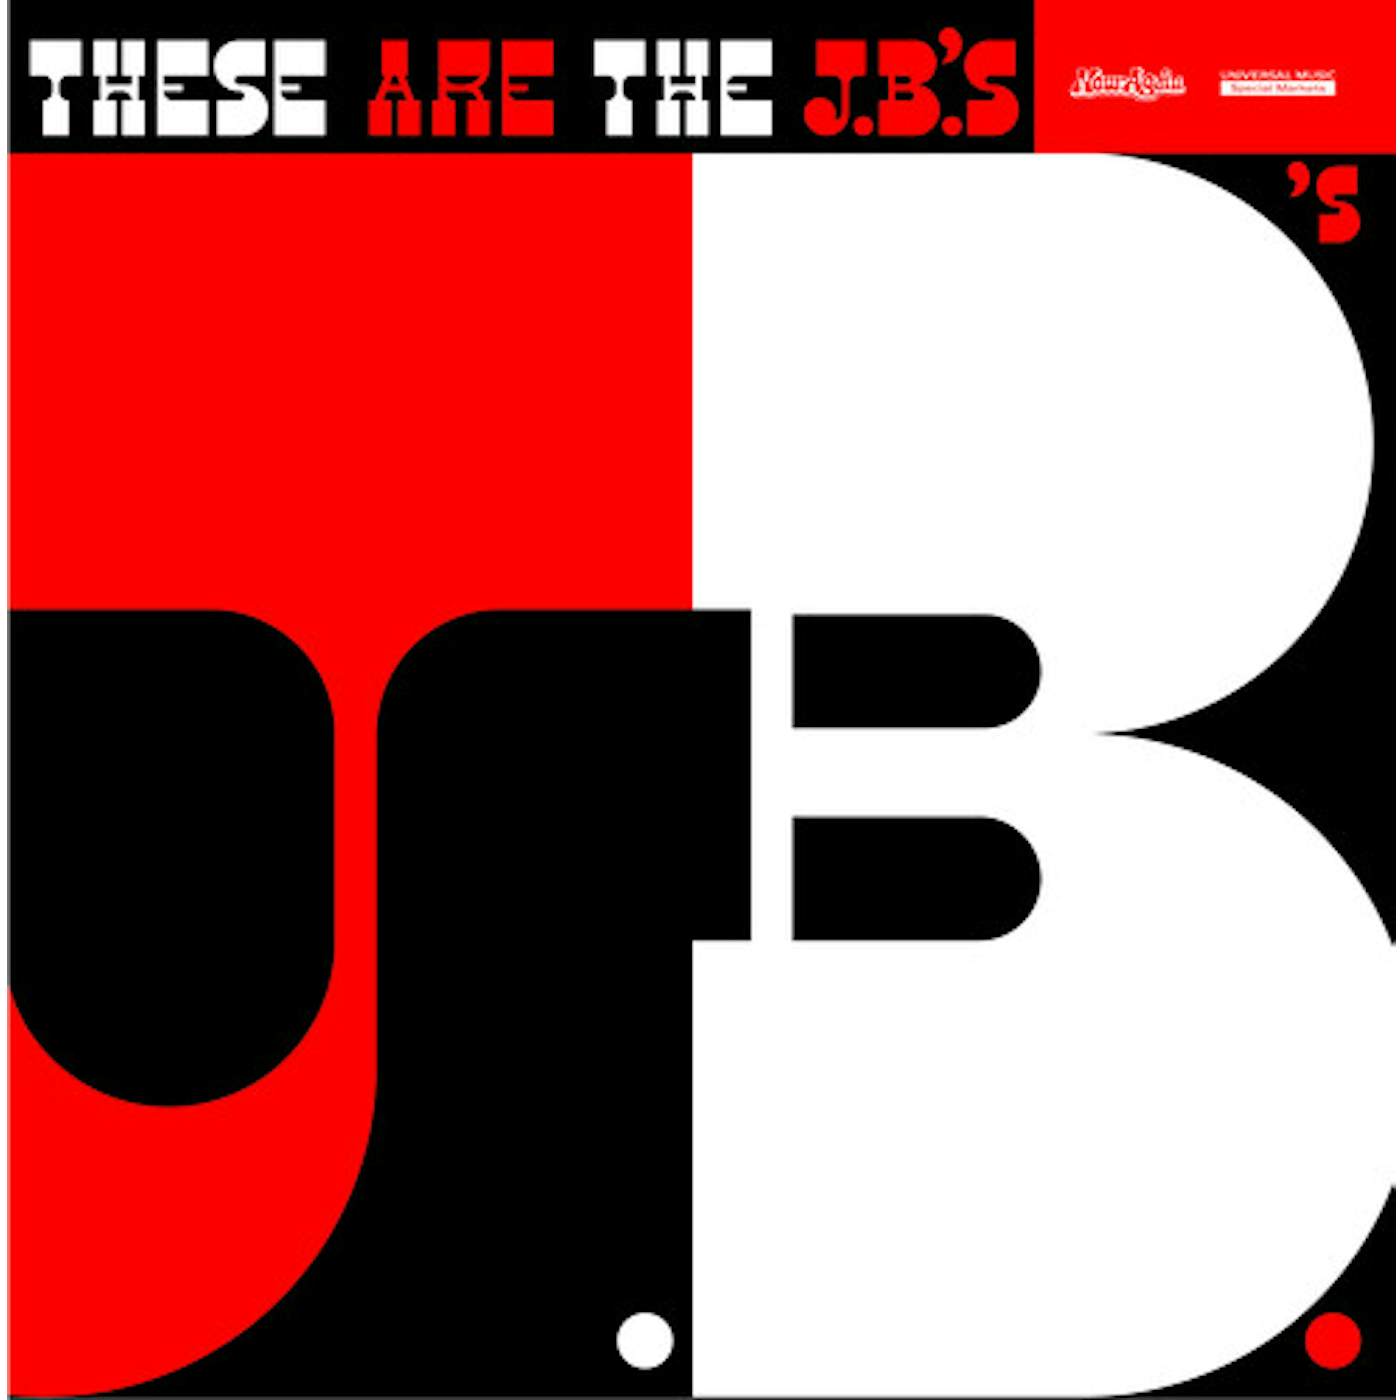 THESE ARE THE The J.B.'s CD